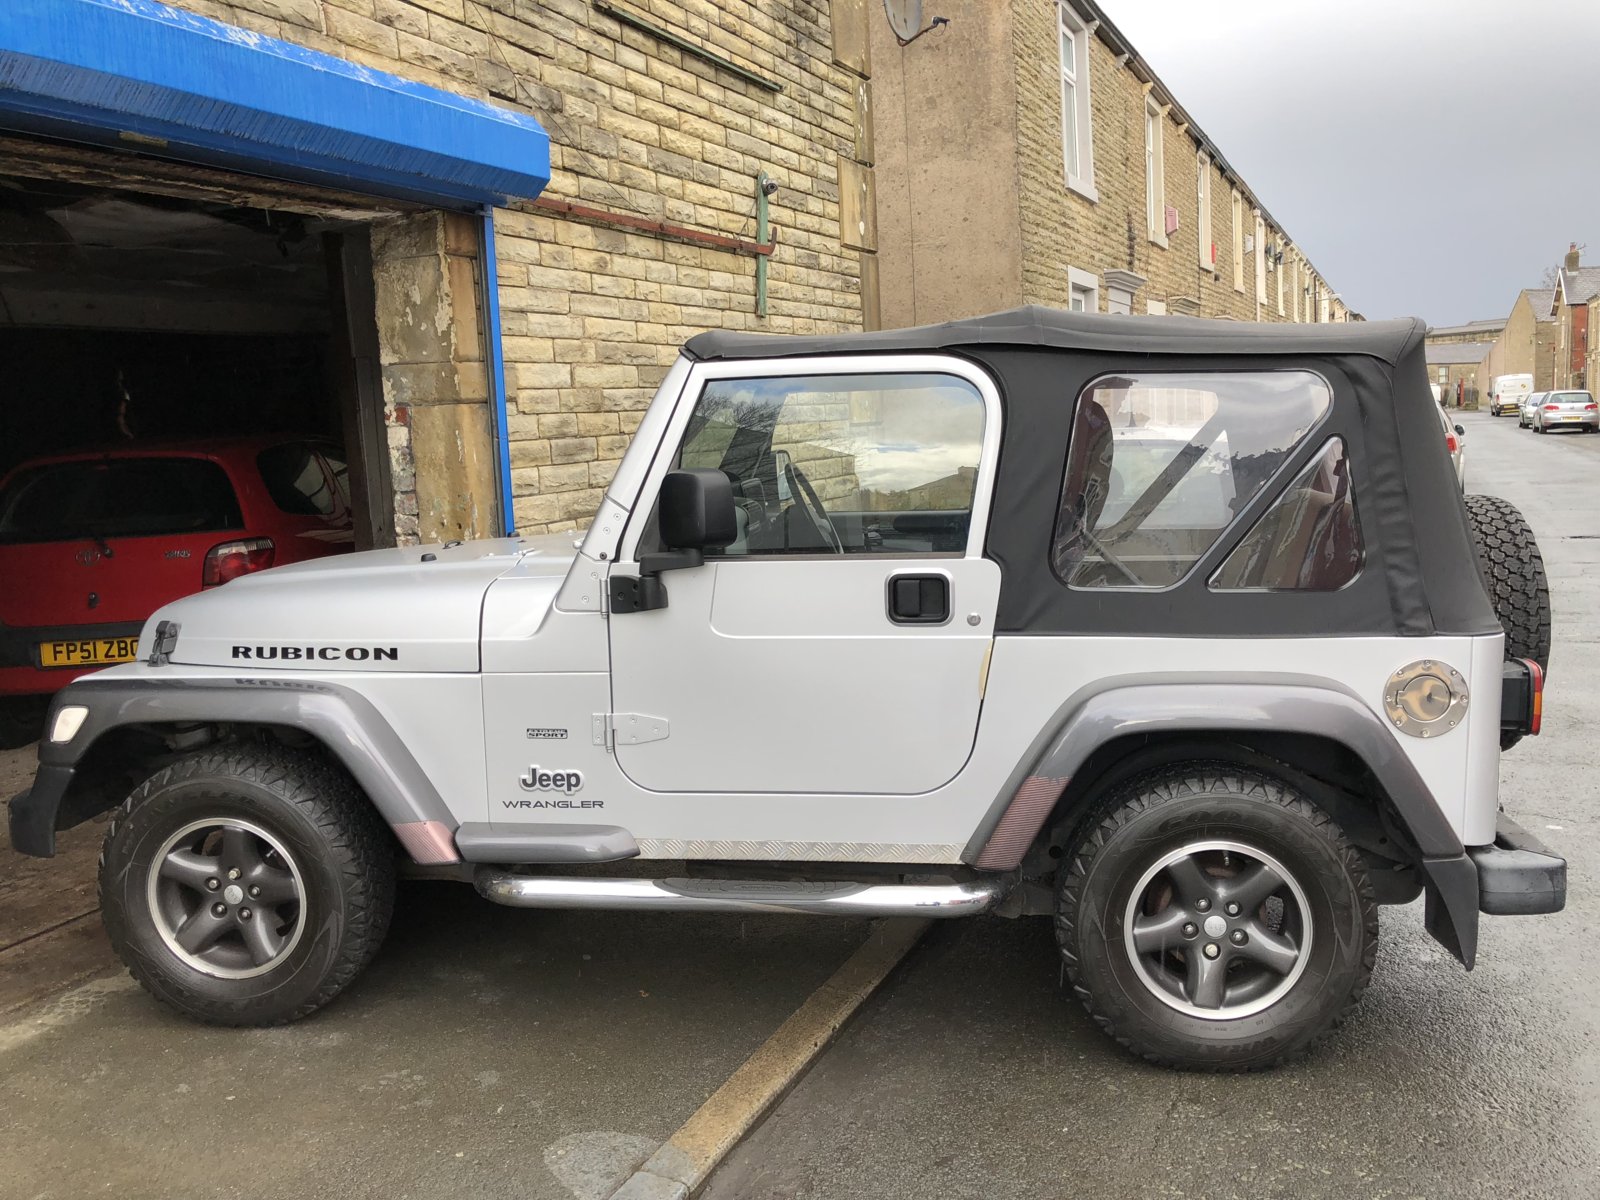 Looking for info on a TJ 